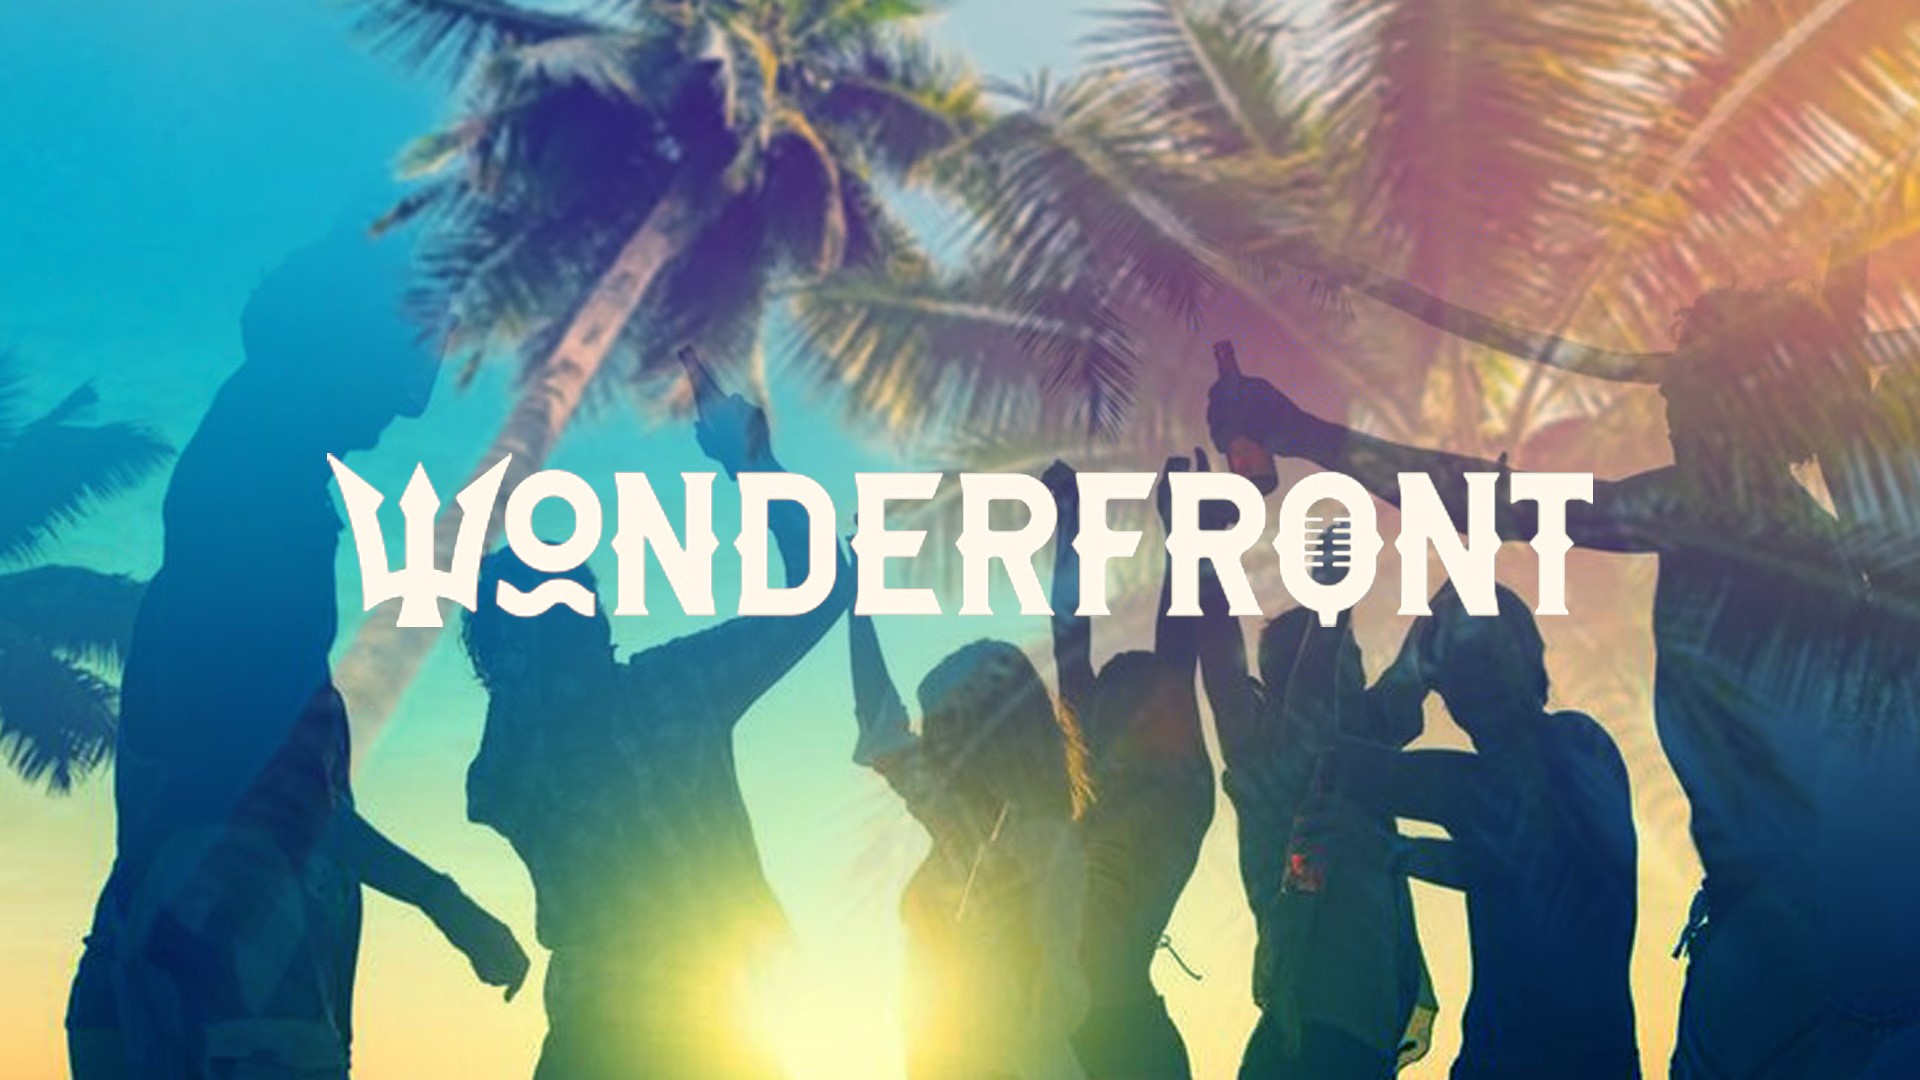 San Diego bands playing Wonderfront Festival